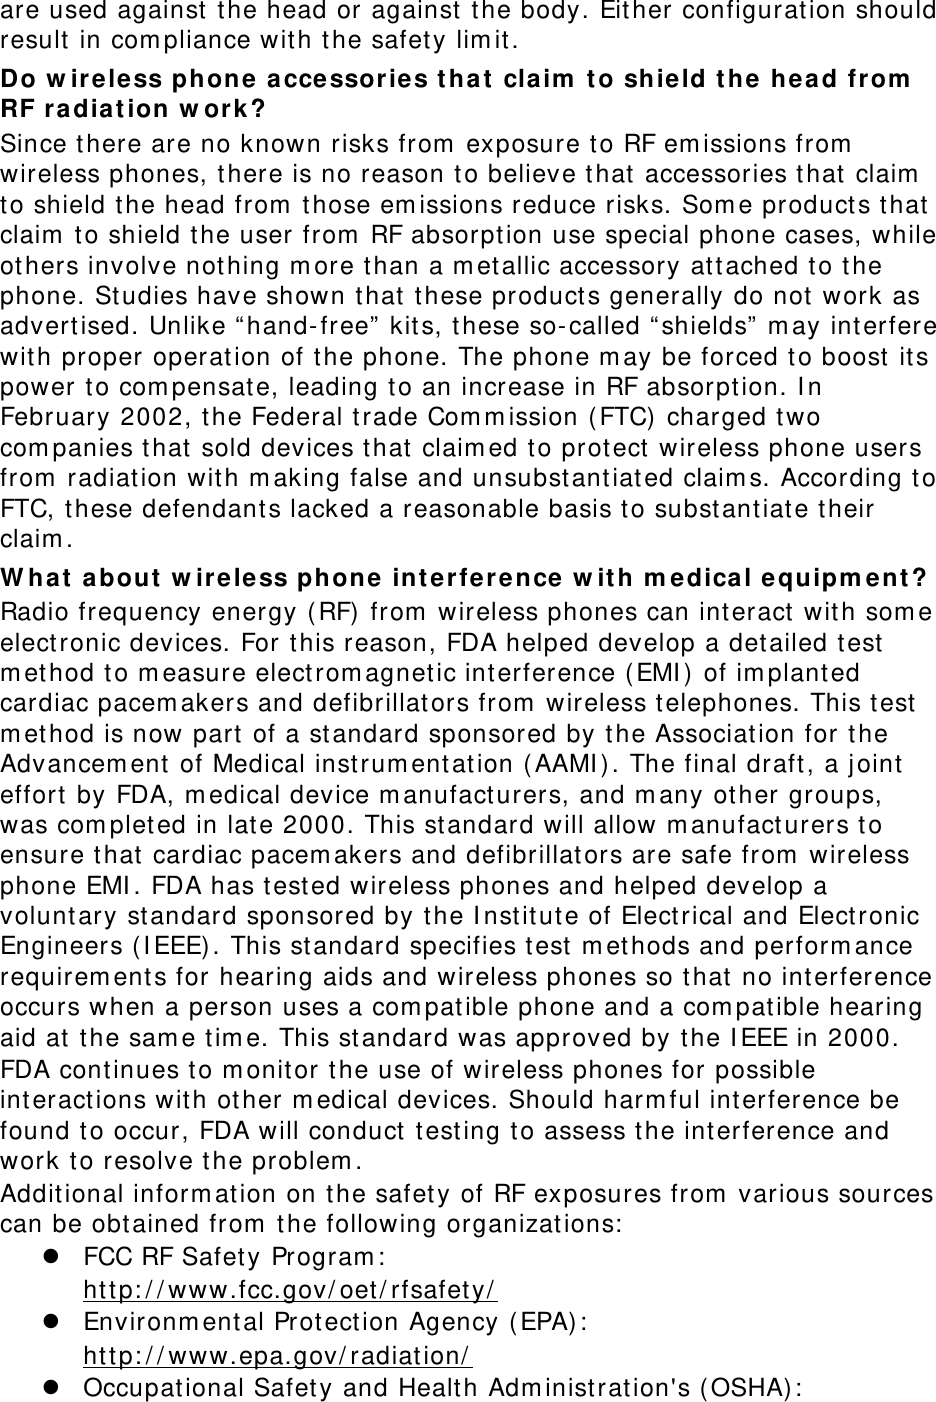 are used against  t he head or against  t he body. Eit her configuration should result  in com pliance with t he safety lim it. Do w ir e le ss phone a ccessories t ha t  cla im  t o shie ld t he he a d from  RF ra dia t ion w or k ? Since there are no known risks from  exposure to RF em issions from  wireless phones, t here is no reason t o believe t hat accessories t hat claim  to shield t he head from  t hose em issions reduce risks. Som e product s that  claim  t o shield t he user from  RF absorpt ion use special phone cases, while others involve not hing m ore t han a m etallic accessory att ached to t he phone. Studies have shown t hat t hese product s generally do not work as advert ised. Unlike “ hand- free”  kit s, these so- called “ shields”  m ay int erfere with proper operation of the phone. The phone m ay be forced t o boost  its power t o com pensat e, leading t o an increase in RF absorpt ion. I n February 2002, t he Federal t rade Com m ission ( FTC) charged t wo com panies t hat sold devices t hat claim ed t o protect  wireless phone users from  radiat ion with m aking false and unsubst ant iated claim s. According t o FTC, t hese defendant s lacked a reasonable basis t o subst ant iate their claim . W ha t a bout  w ir e le ss phone  int erference w it h m e dical e qu ipm ent ? Radio frequency energy ( RF)  from  wireless phones can int eract  wit h som e elect ronic devices. For this reason, FDA helped develop a detailed test  m et hod t o m easure elect rom agnetic int erference ( EMI )  of im plant ed cardiac pacem akers and defibrillators from  wireless t elephones. This t est m et hod is now part  of a standard sponsored by t he Association for t he Advancem ent  of Medical inst rum entation ( AAMI ) . The final draft , a joint effort  by FDA, m edical device m anufact urers, and m any other groups, was com pleted in late 2000. This standard will allow m anufact urers t o ensure that cardiac pacem akers and defibrillators are safe from  wireless phone EMI . FDA has t est ed wireless phones and helped develop a volunt ary st andard sponsored by t he I nst itute of Elect rical and Electronic Engineers ( I EEE) . This standard specifies t est  m ethods and perform ance requirem ent s for hearing aids and wireless phones so t hat no interference occurs when a person uses a com patible phone and a com pat ible hearing aid at  t he sam e t im e. This st andard was approved by the I EEE in 2000. FDA cont inues t o m onitor t he use of wireless phones for possible interactions with other m edical devices. Should harm ful int erference be found t o occur, FDA will conduct test ing t o assess t he interference and work to resolve the problem . Additional inform ation on t he safety of RF exposures from  various sources can be obtained from  t he following organizations:  z FCC RF Safet y Program :   htt p: / / www.fcc.gov/ oet / rfsafet y/  z Environm ental Protect ion Agency ( EPA) :   htt p: / / www.epa.gov/ radiat ion/  z Occupational Safet y and Health Adm inist rat ion&apos;s ( OSHA) :    